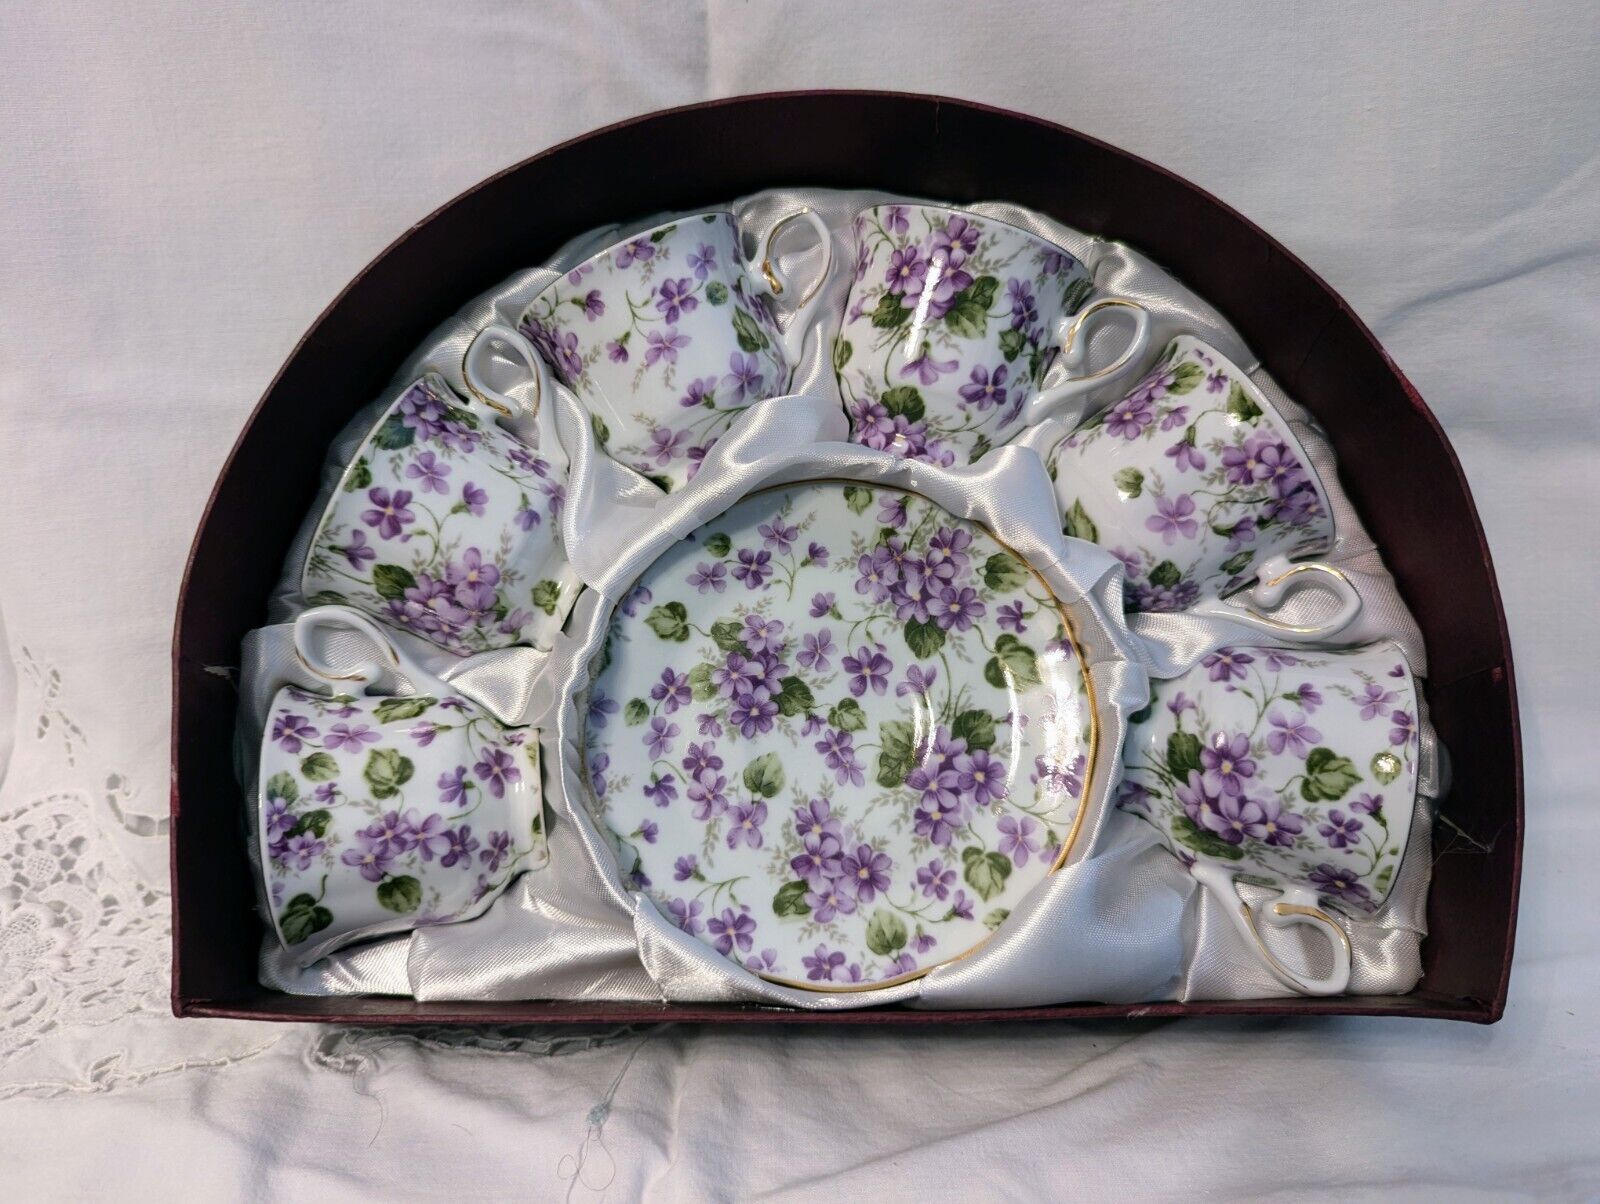 Vintage 12pc Set of Tea Cups and Saucers in Beautiful Purple Flower Motif